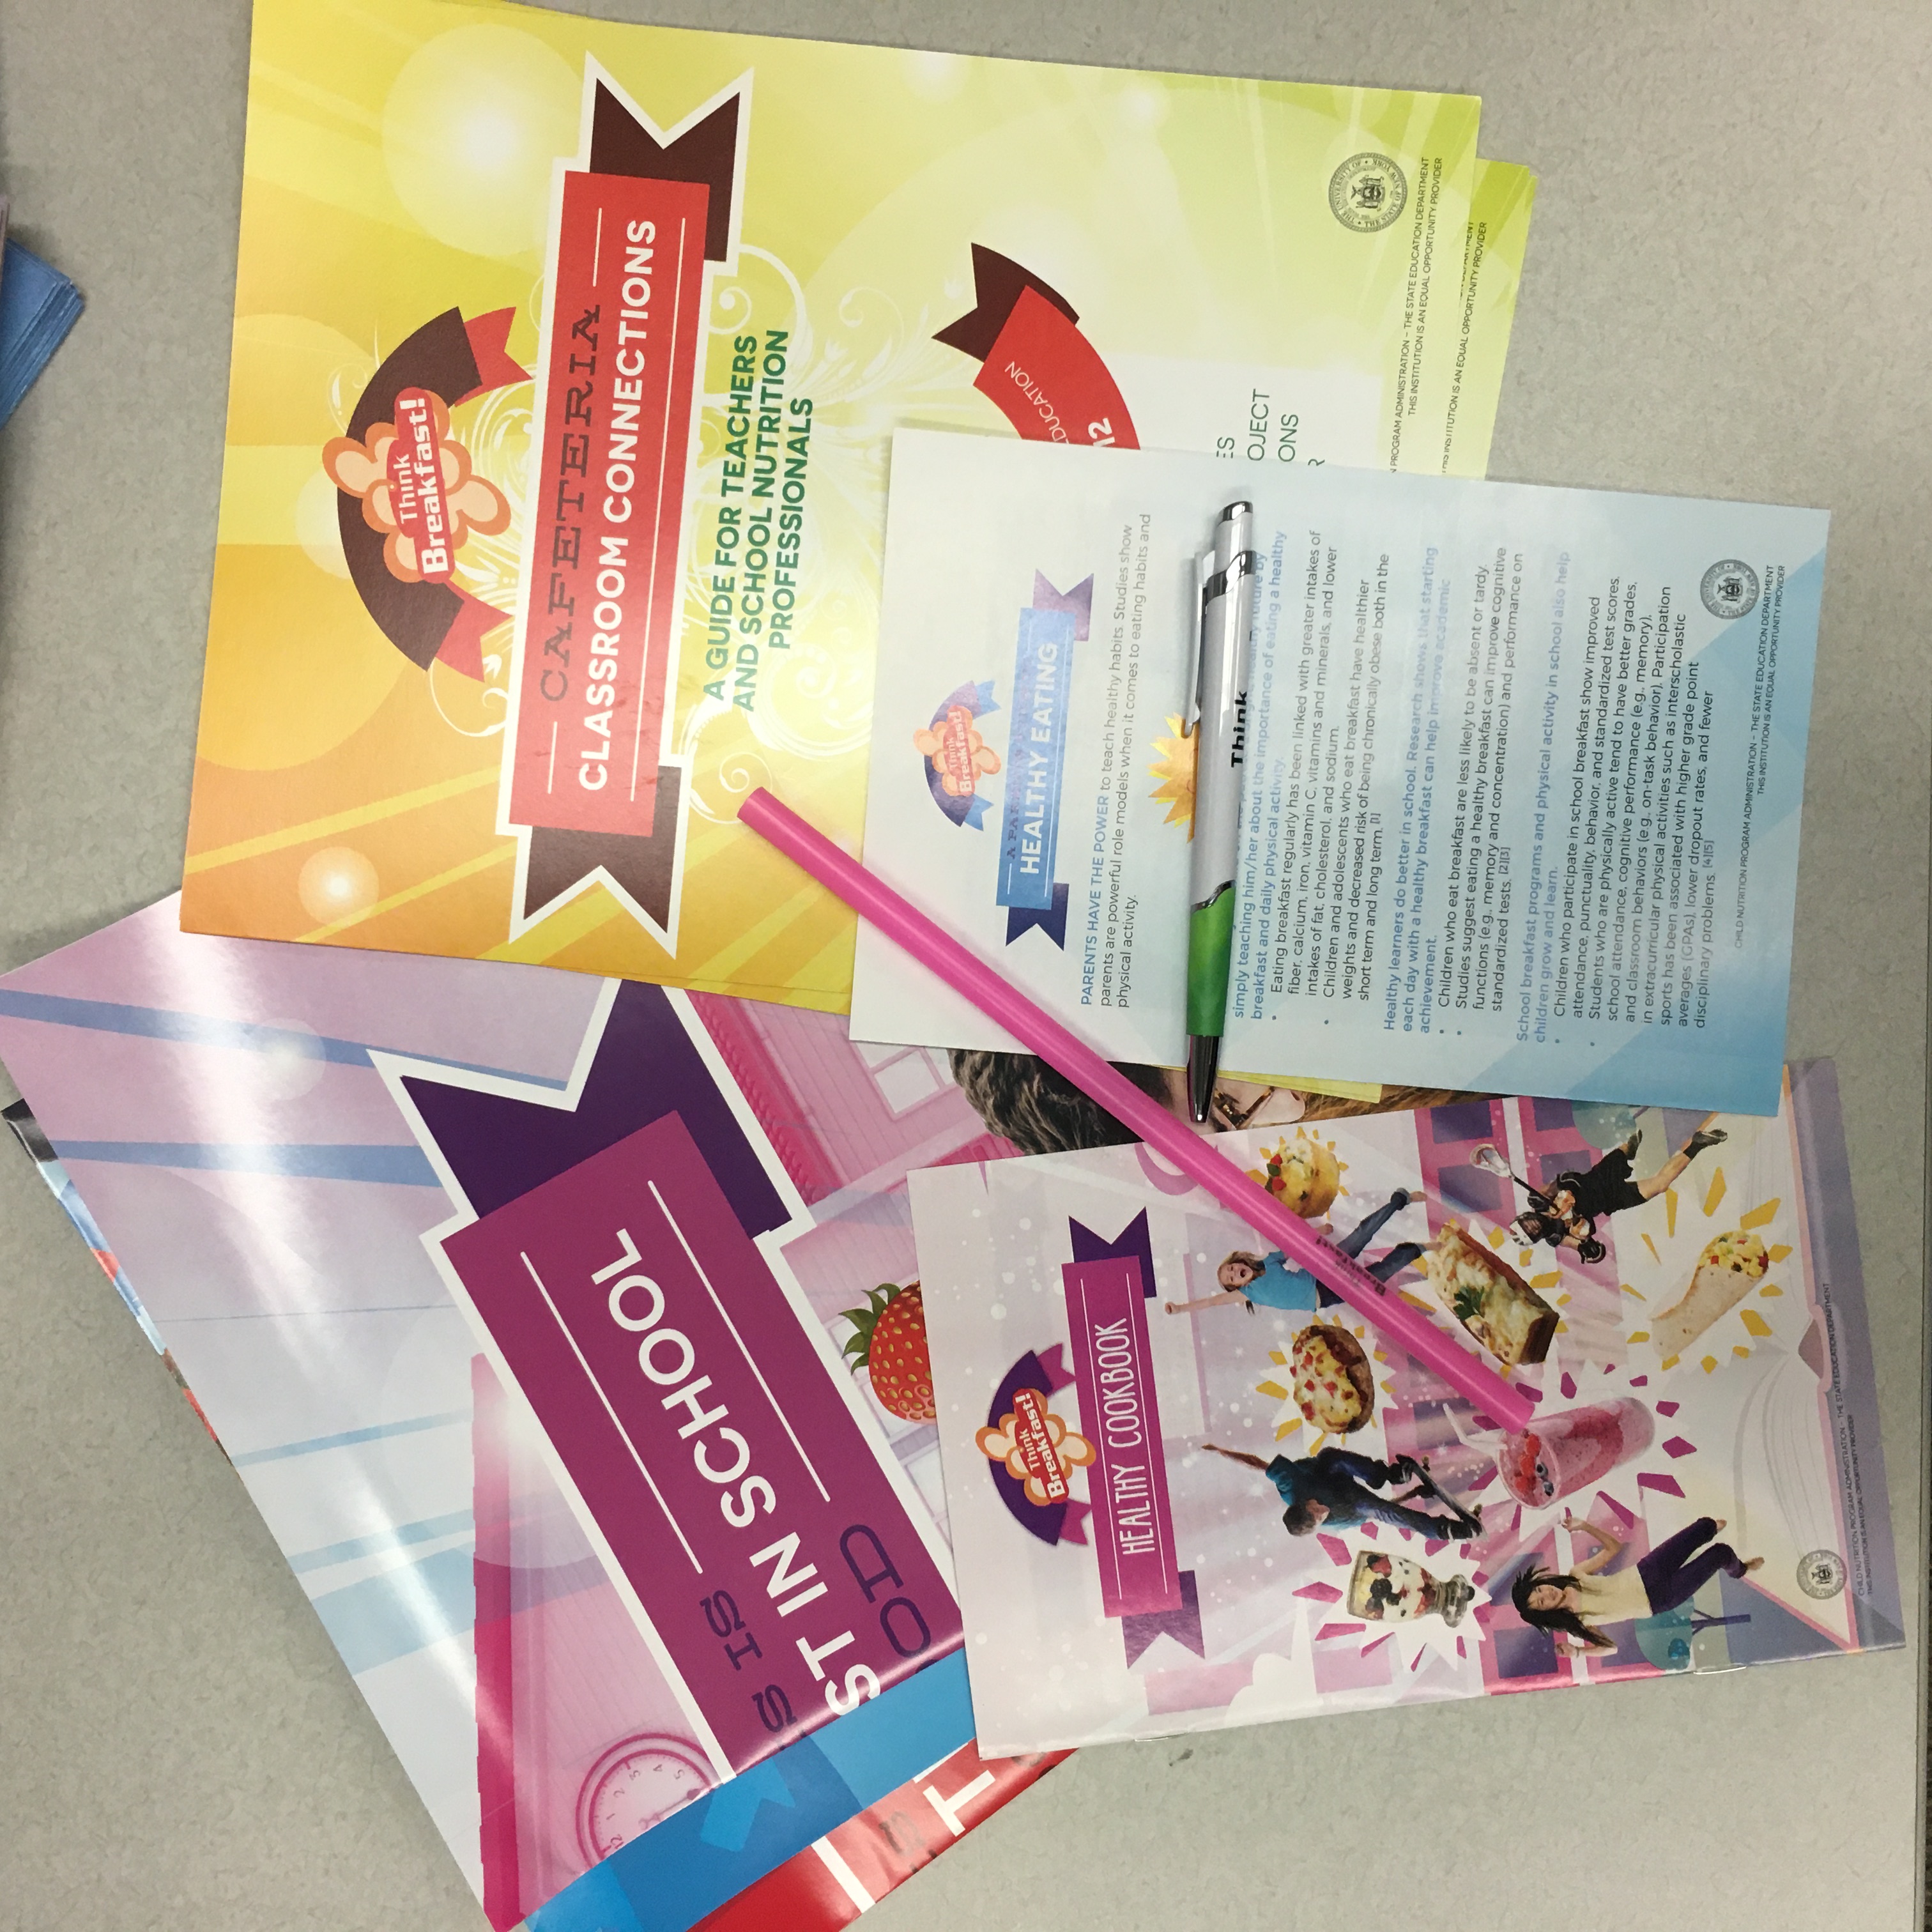 Think Breakfast Kits suitable for Grades 9-12. There is a 3-5 student's guide, a guide to healthy eating, a healthy cookbook, a notebook, a sticker and a straw.